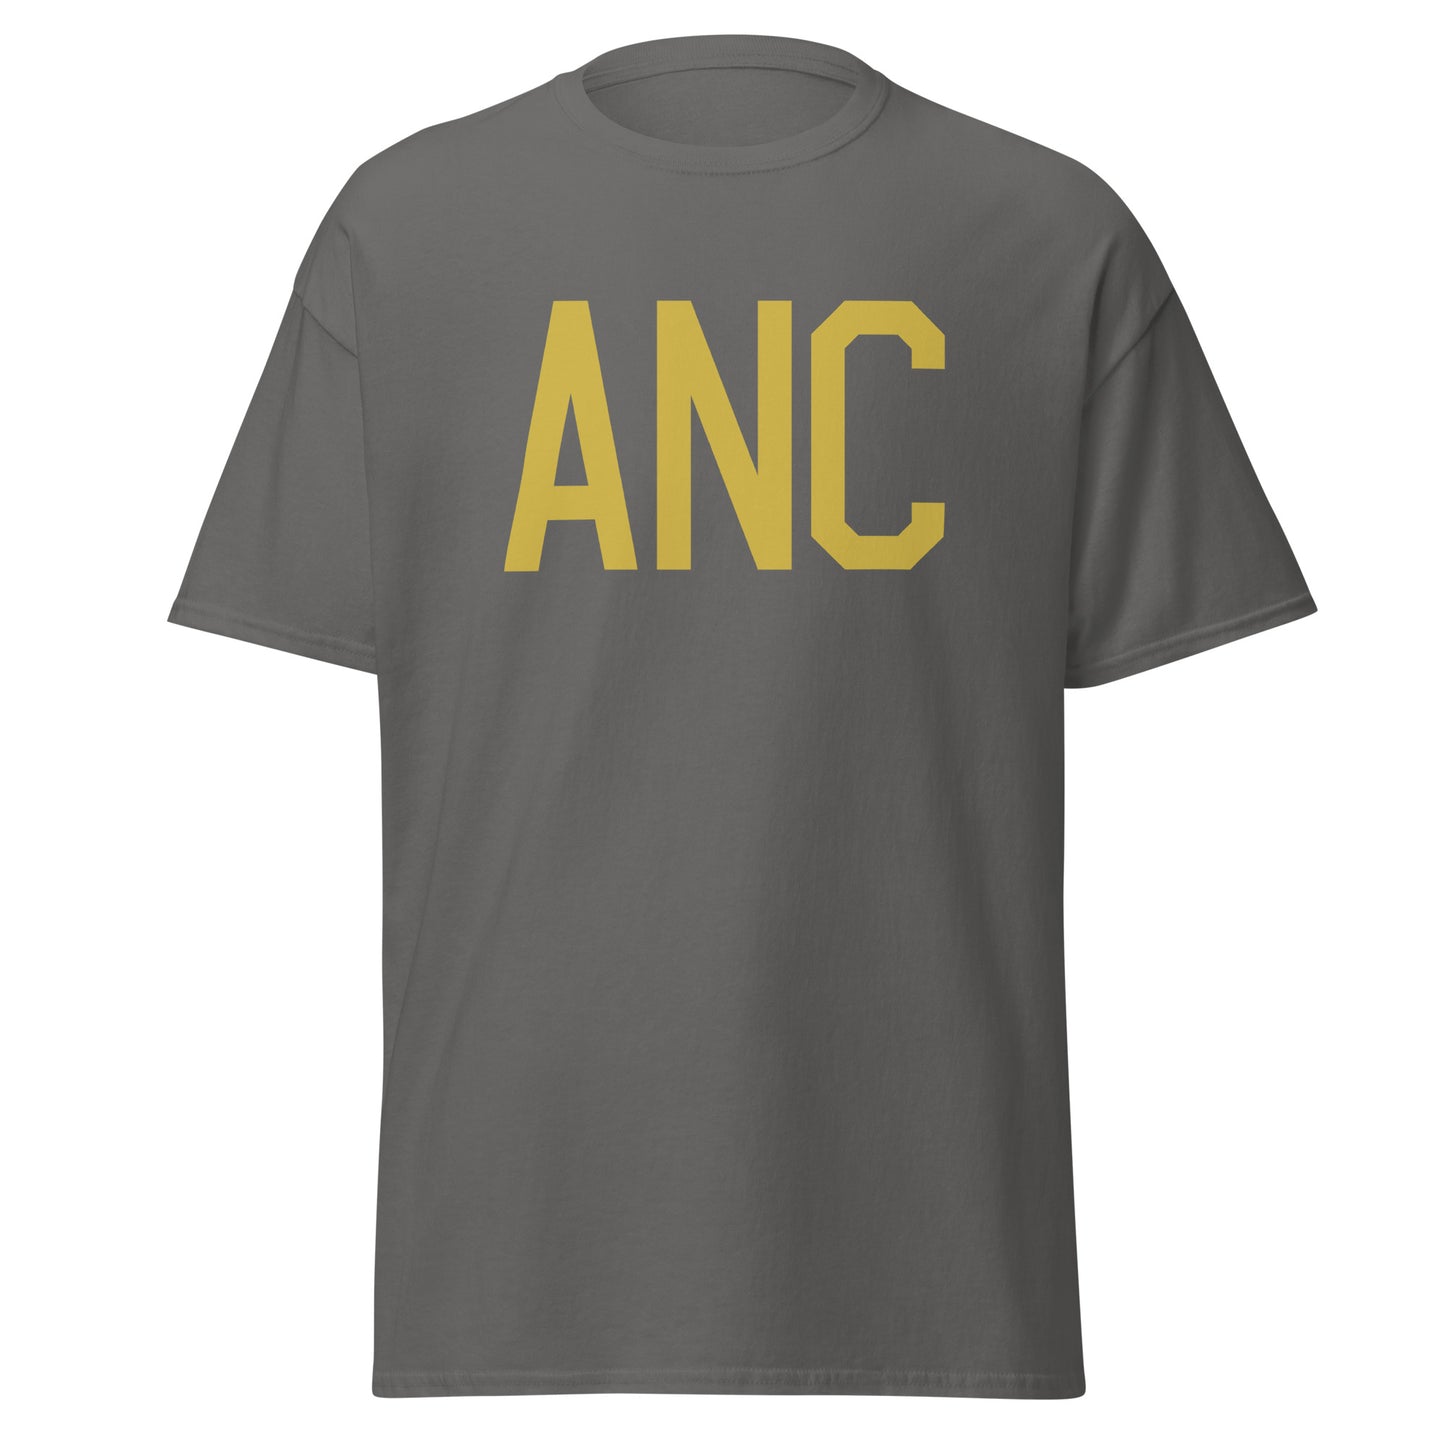 Aviation Enthusiast Men's Tee - Old Gold Graphic • ANC Anchorage • YHM Designs - Image 05